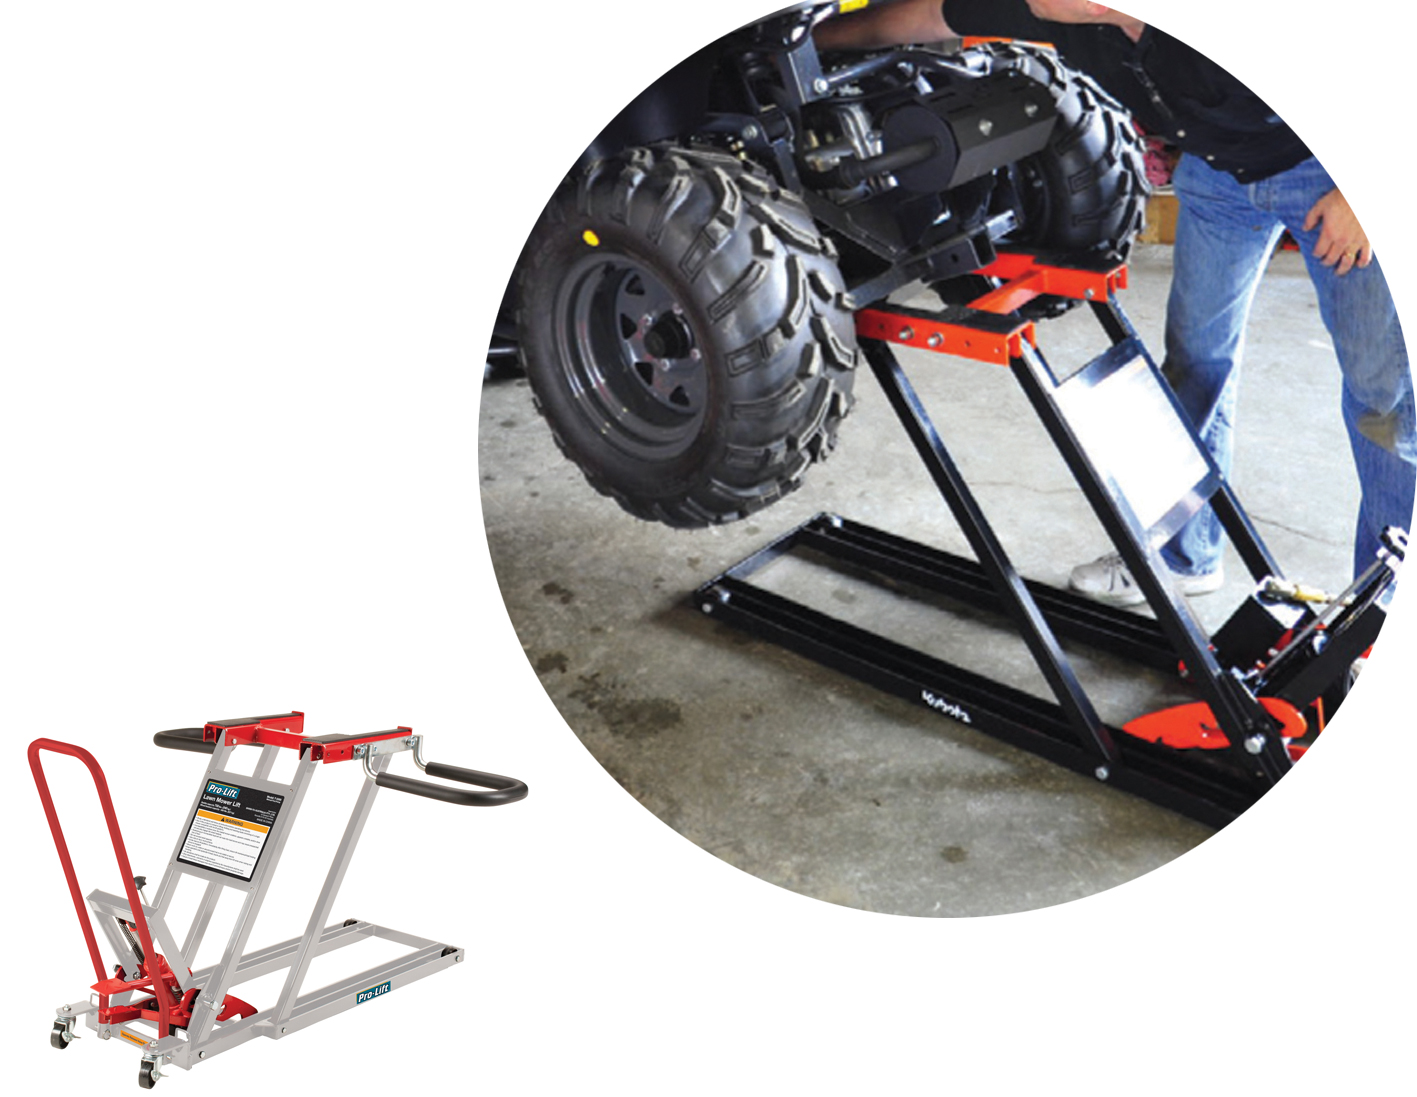 Lifting up an ATV by it's axle using the platform saddle, instead of wheel brackets.